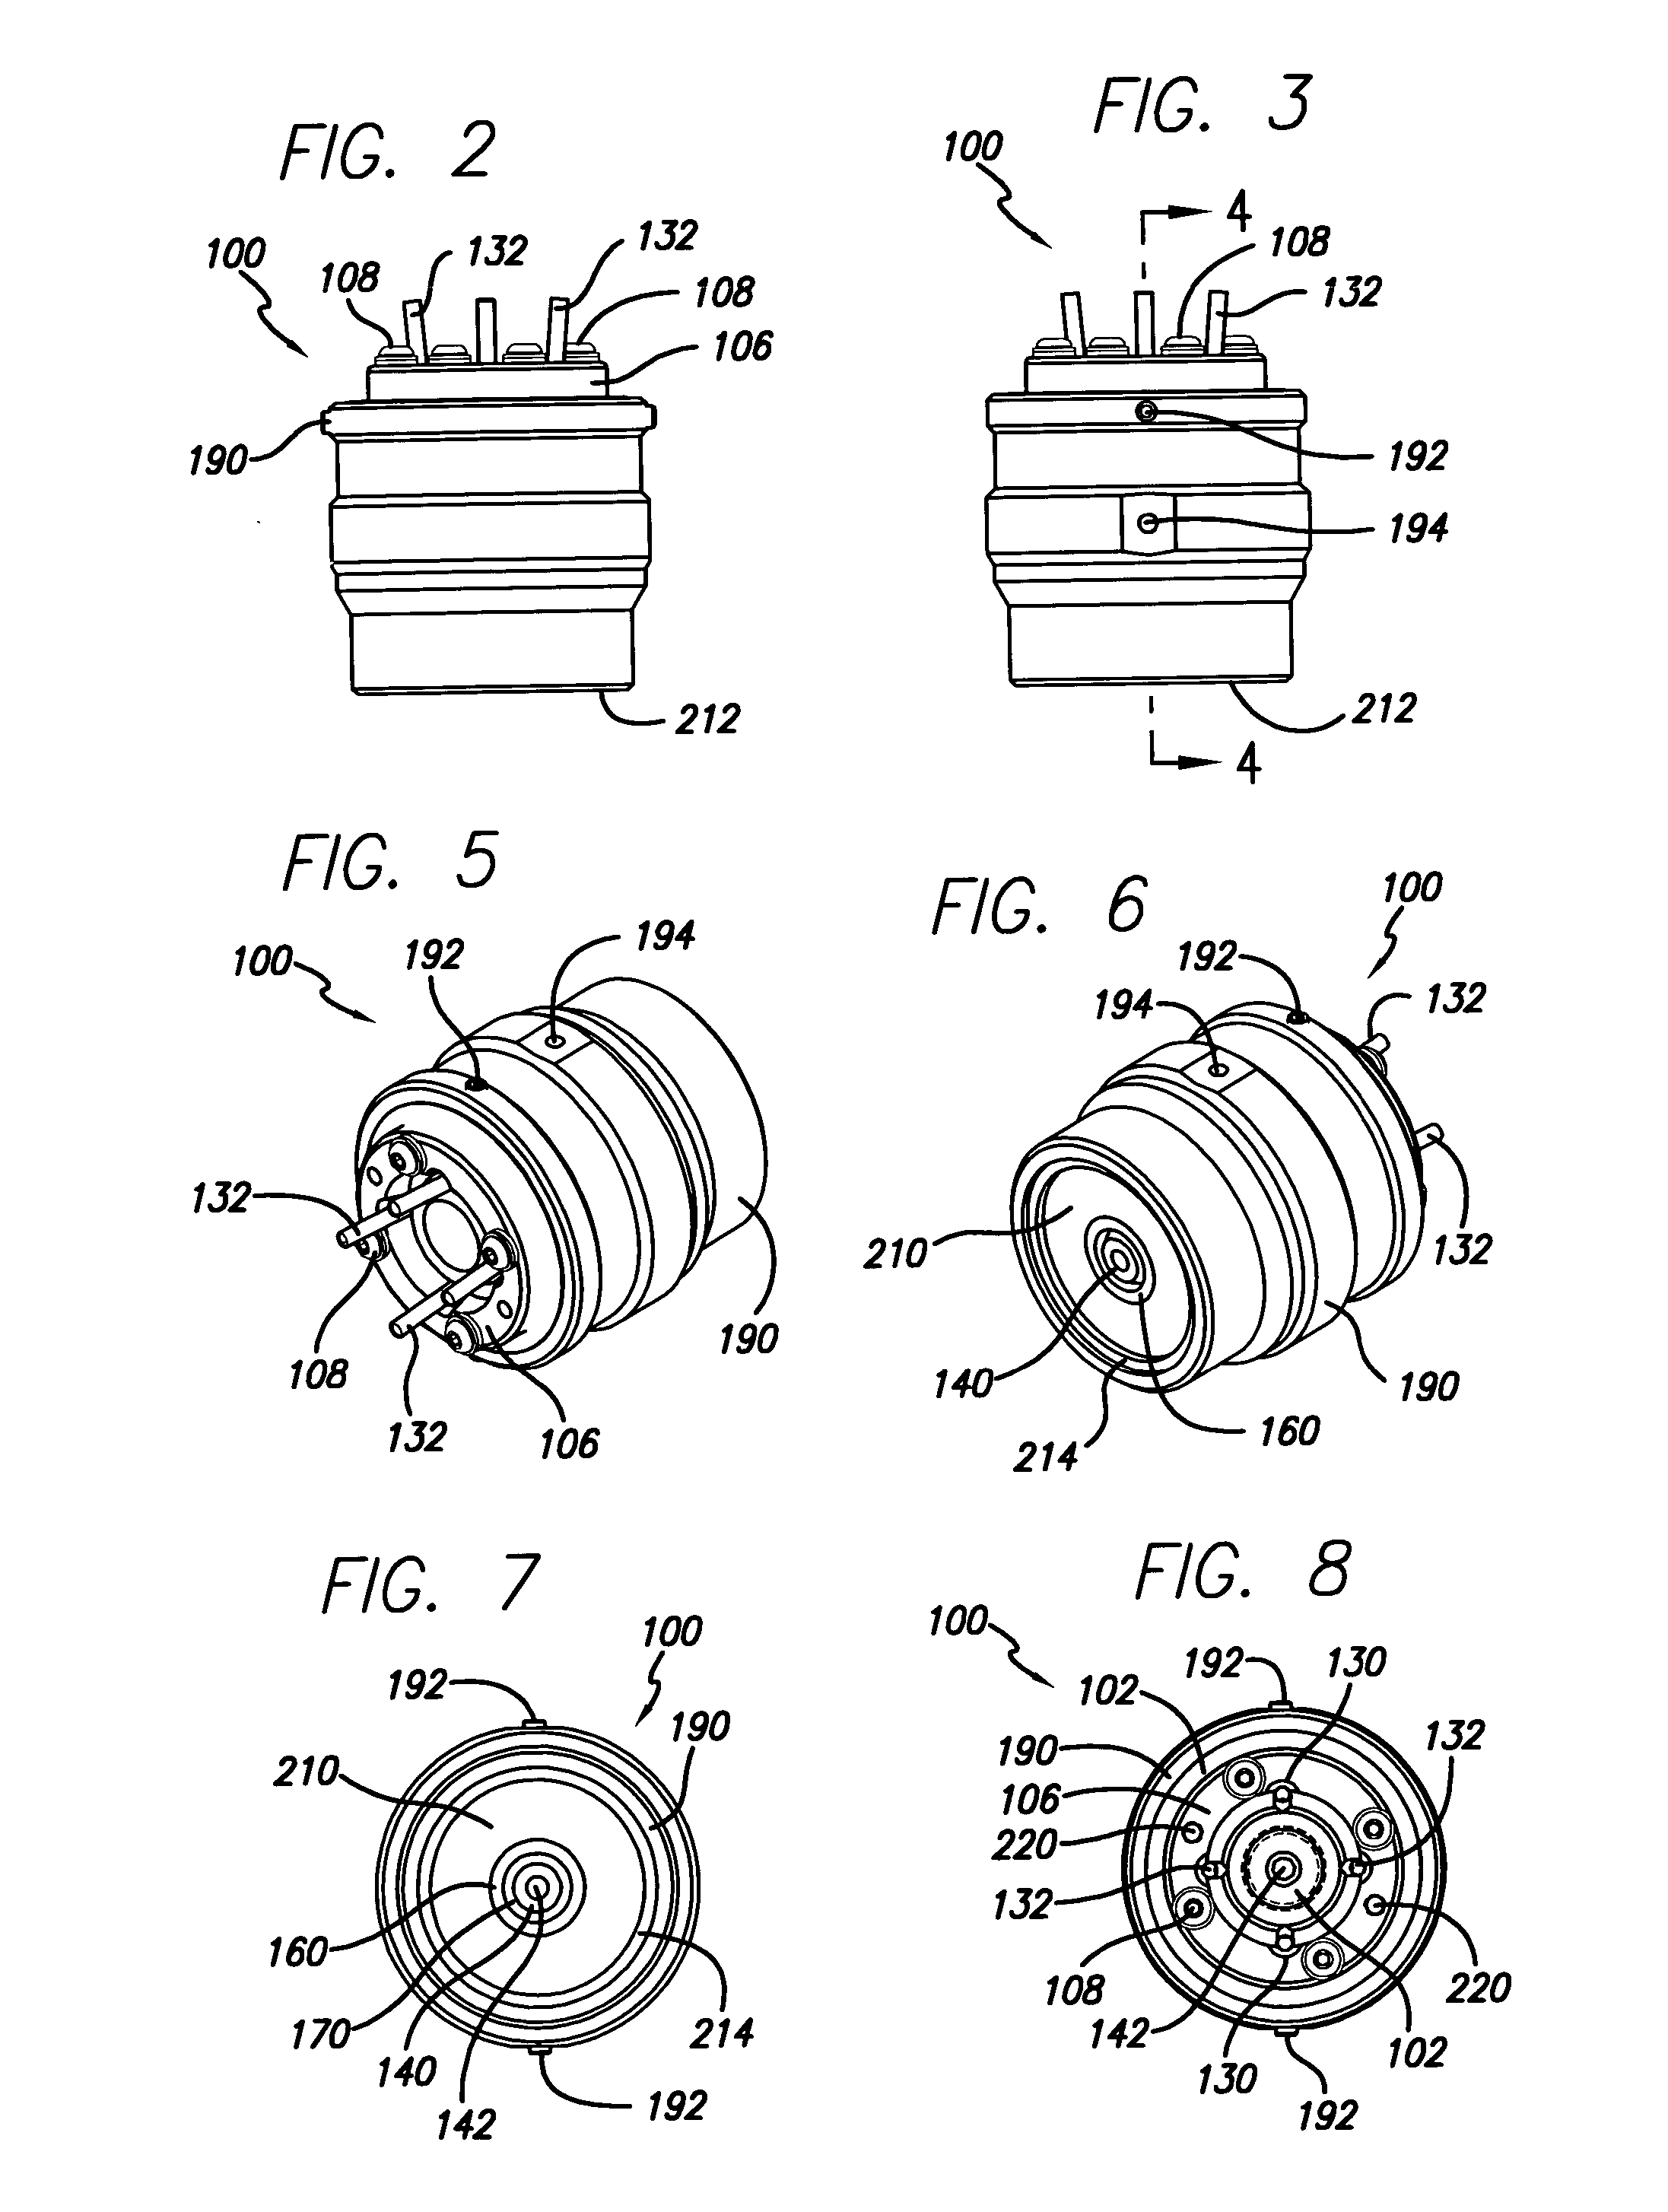 Coaxial nozzle design for laser cladding/welding process